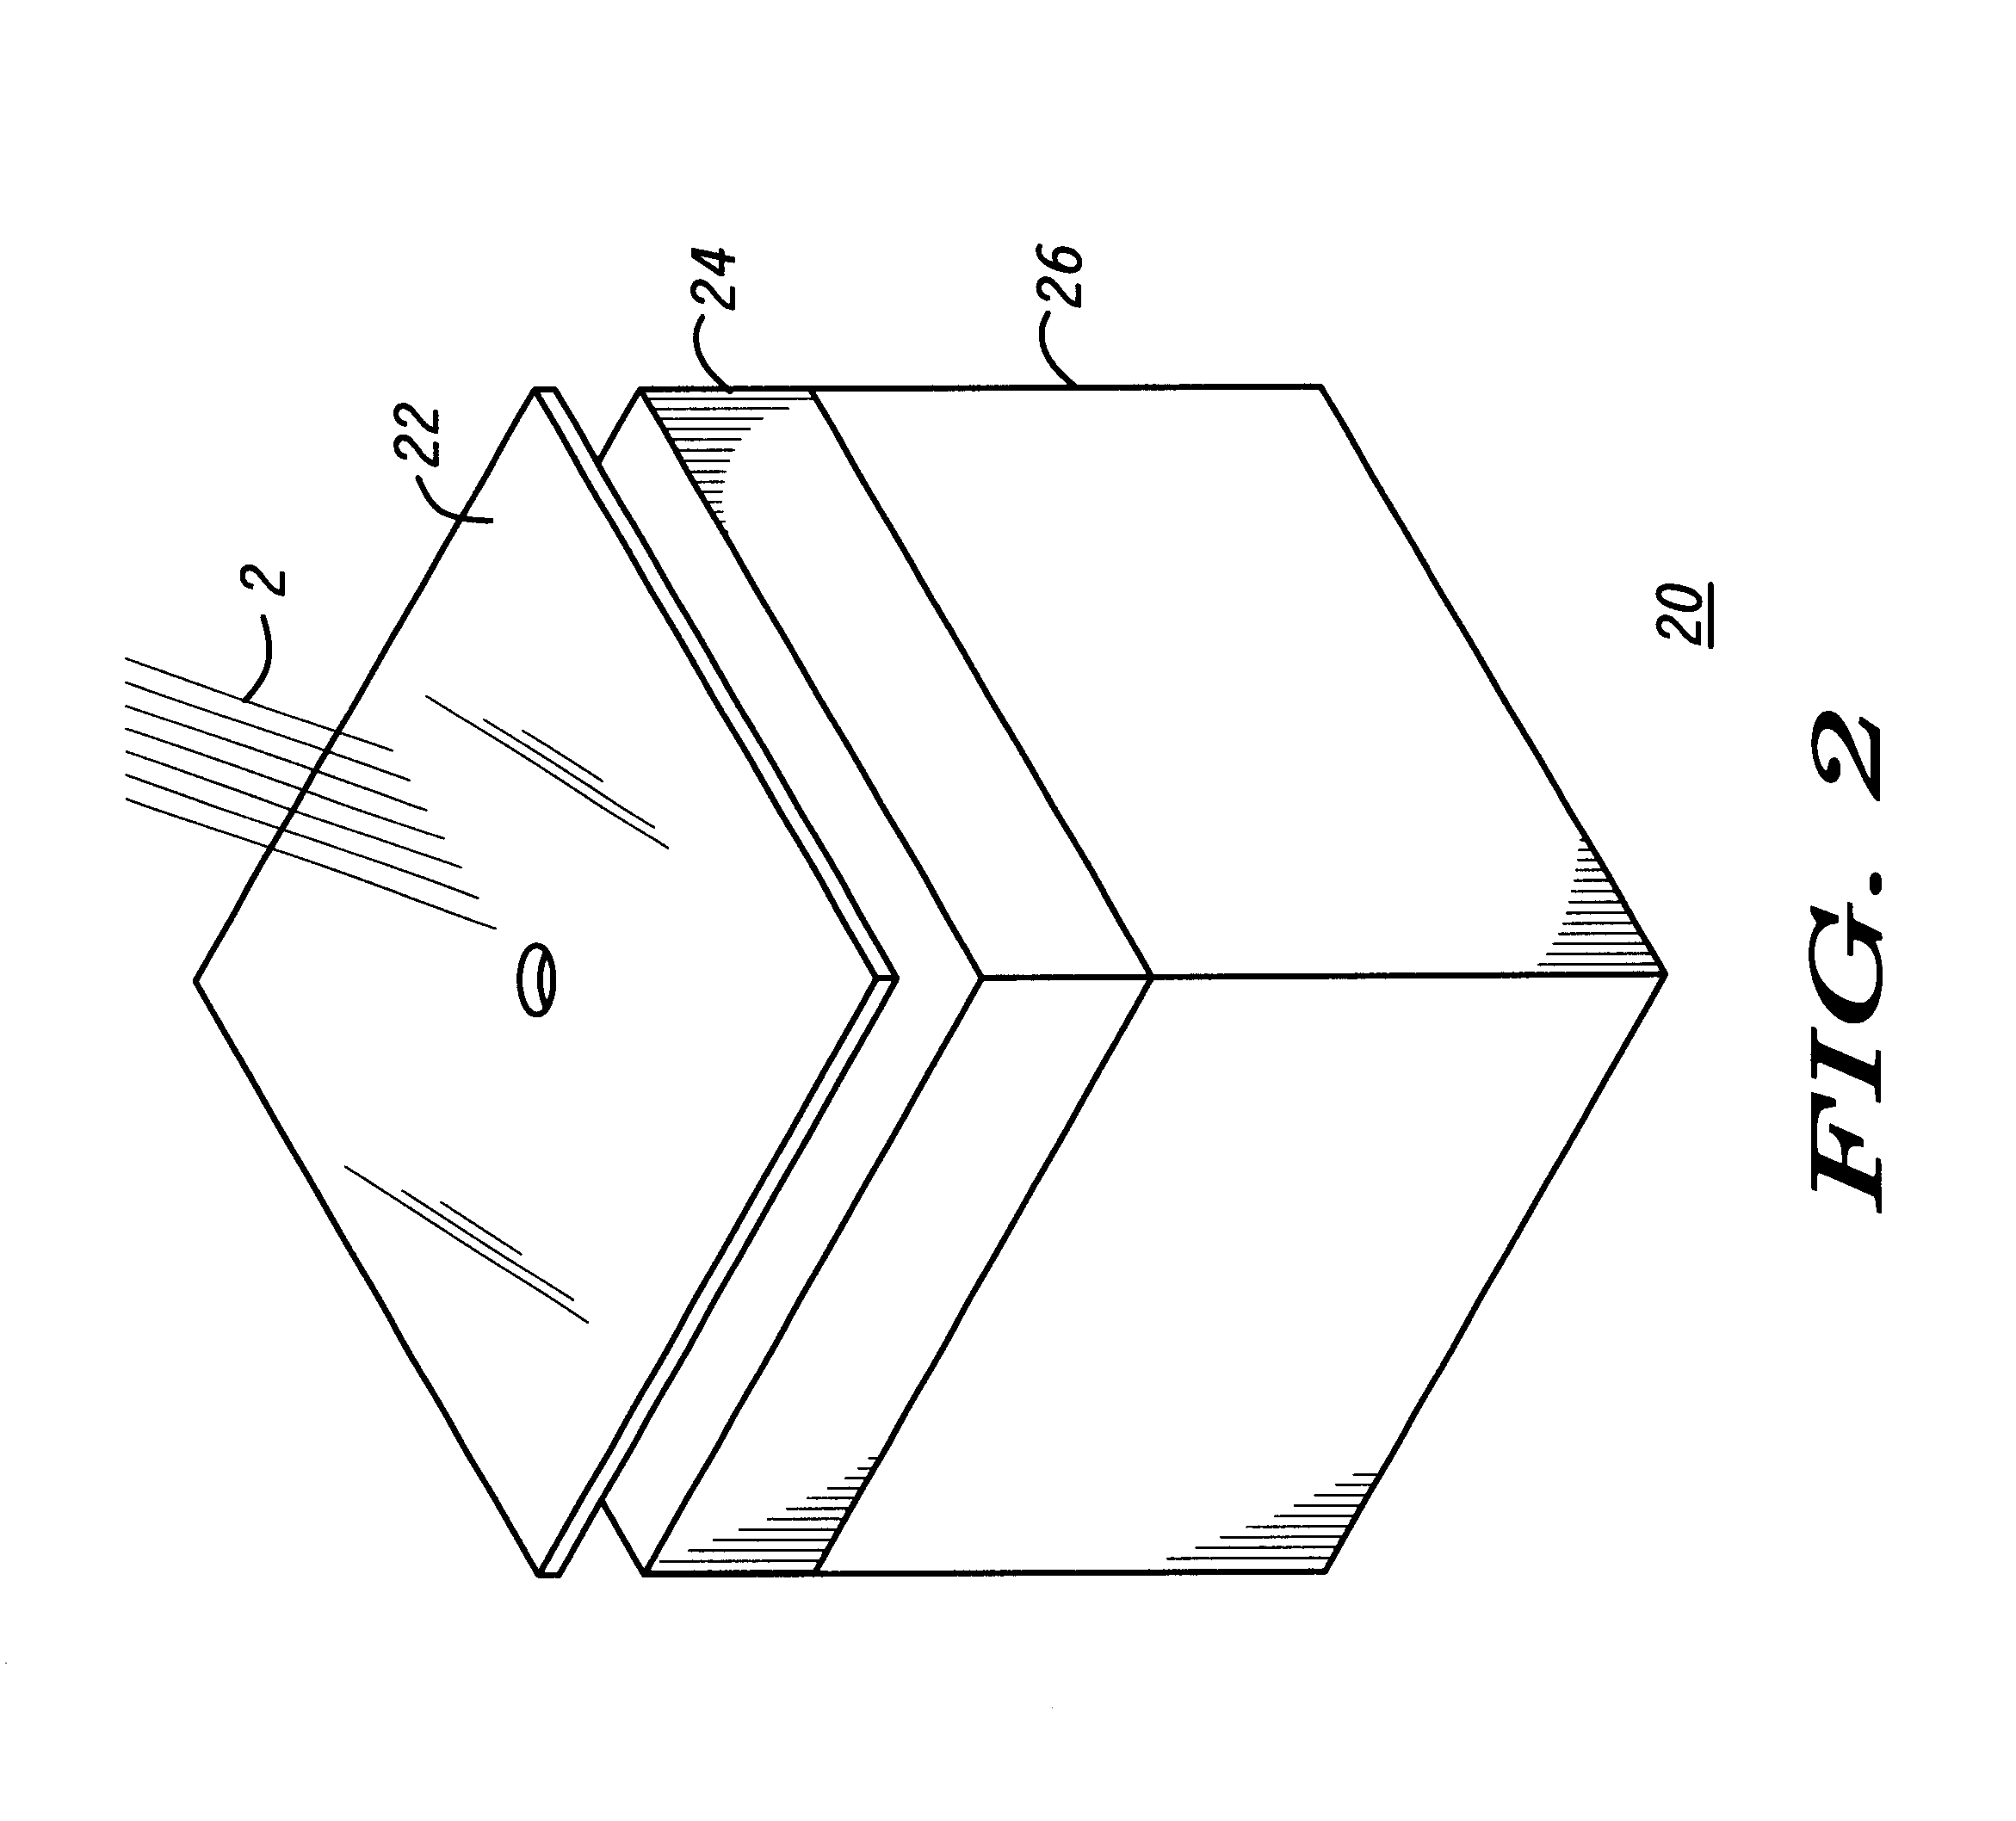 Optically-based location system and method for determining a location at a structure